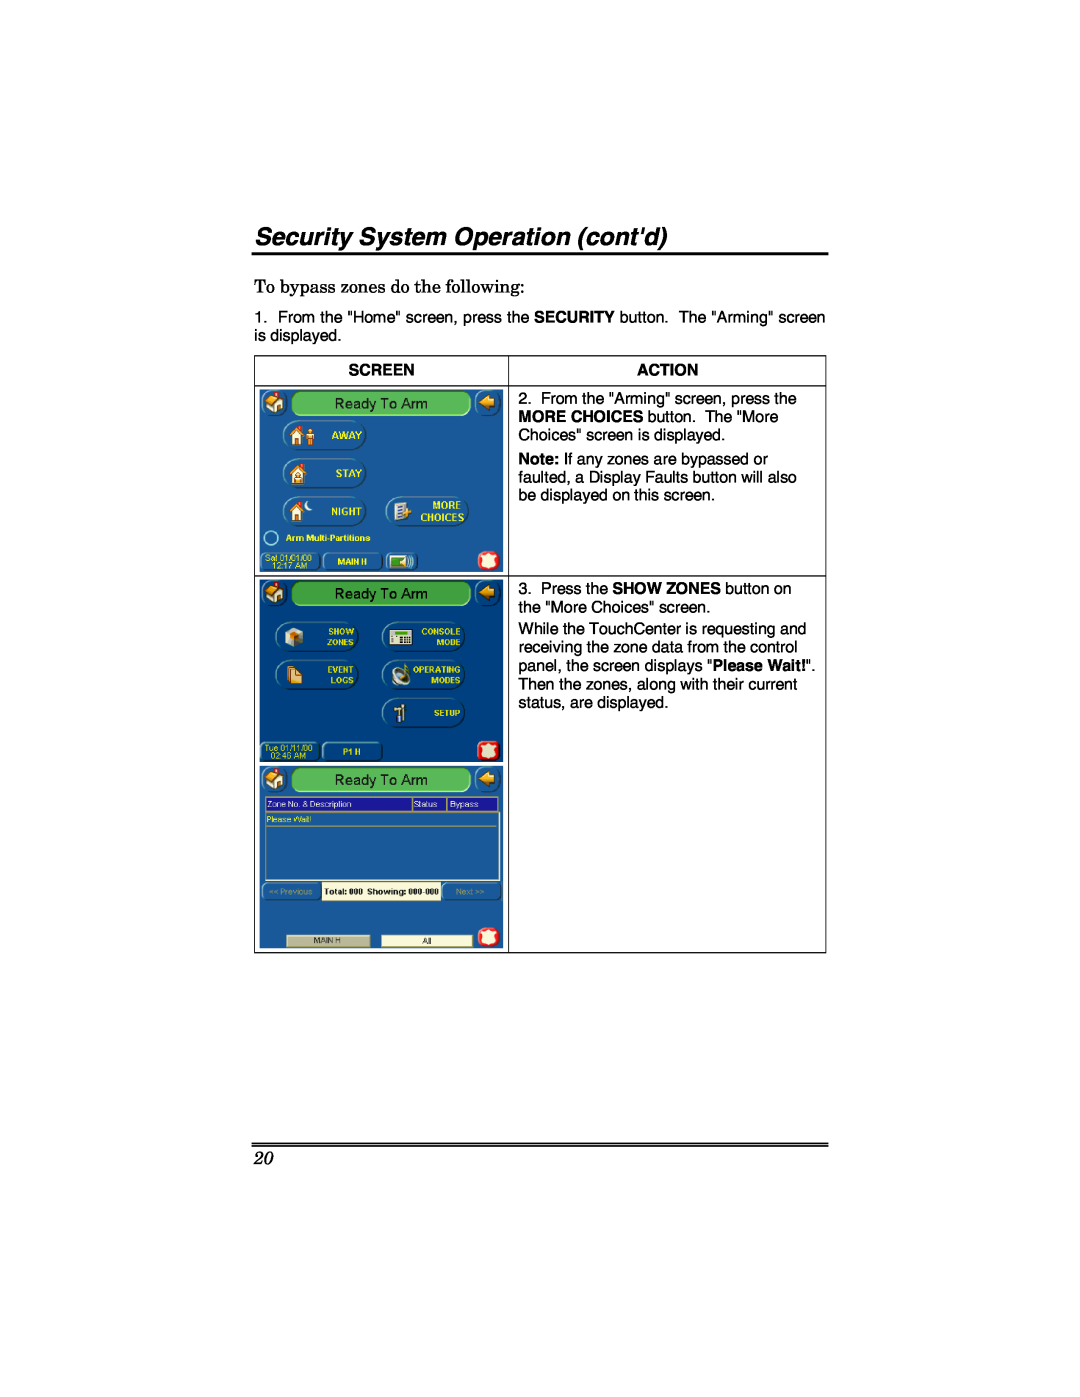 Honeywell 6271 manual Security System Operation contd, To bypass zones do the following, Screen, Action 